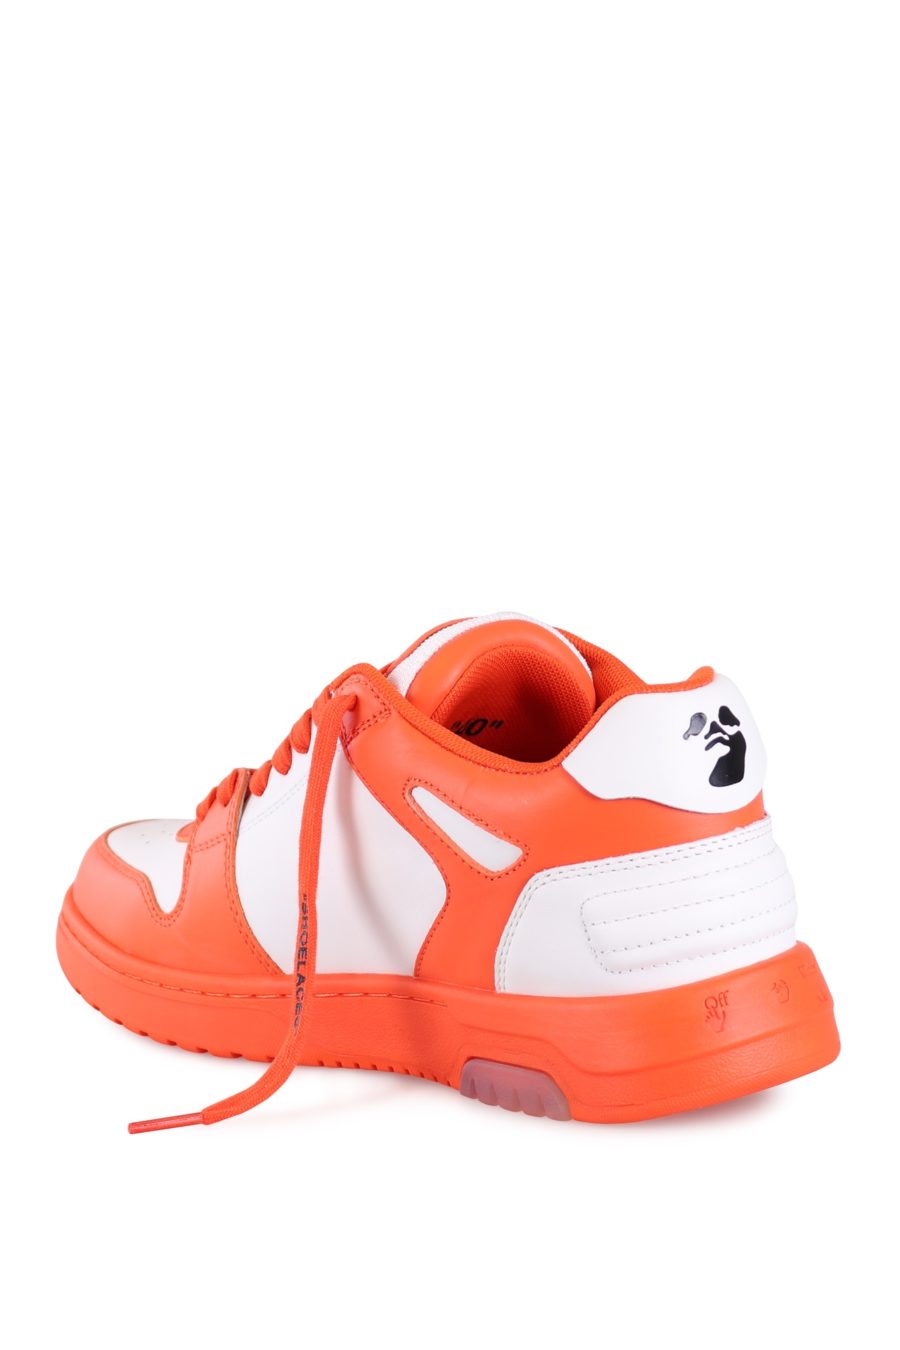 Trainers Off-White "out of office" white with orange - 09658c0be10c673e44c72b1b0855d8298251e02c